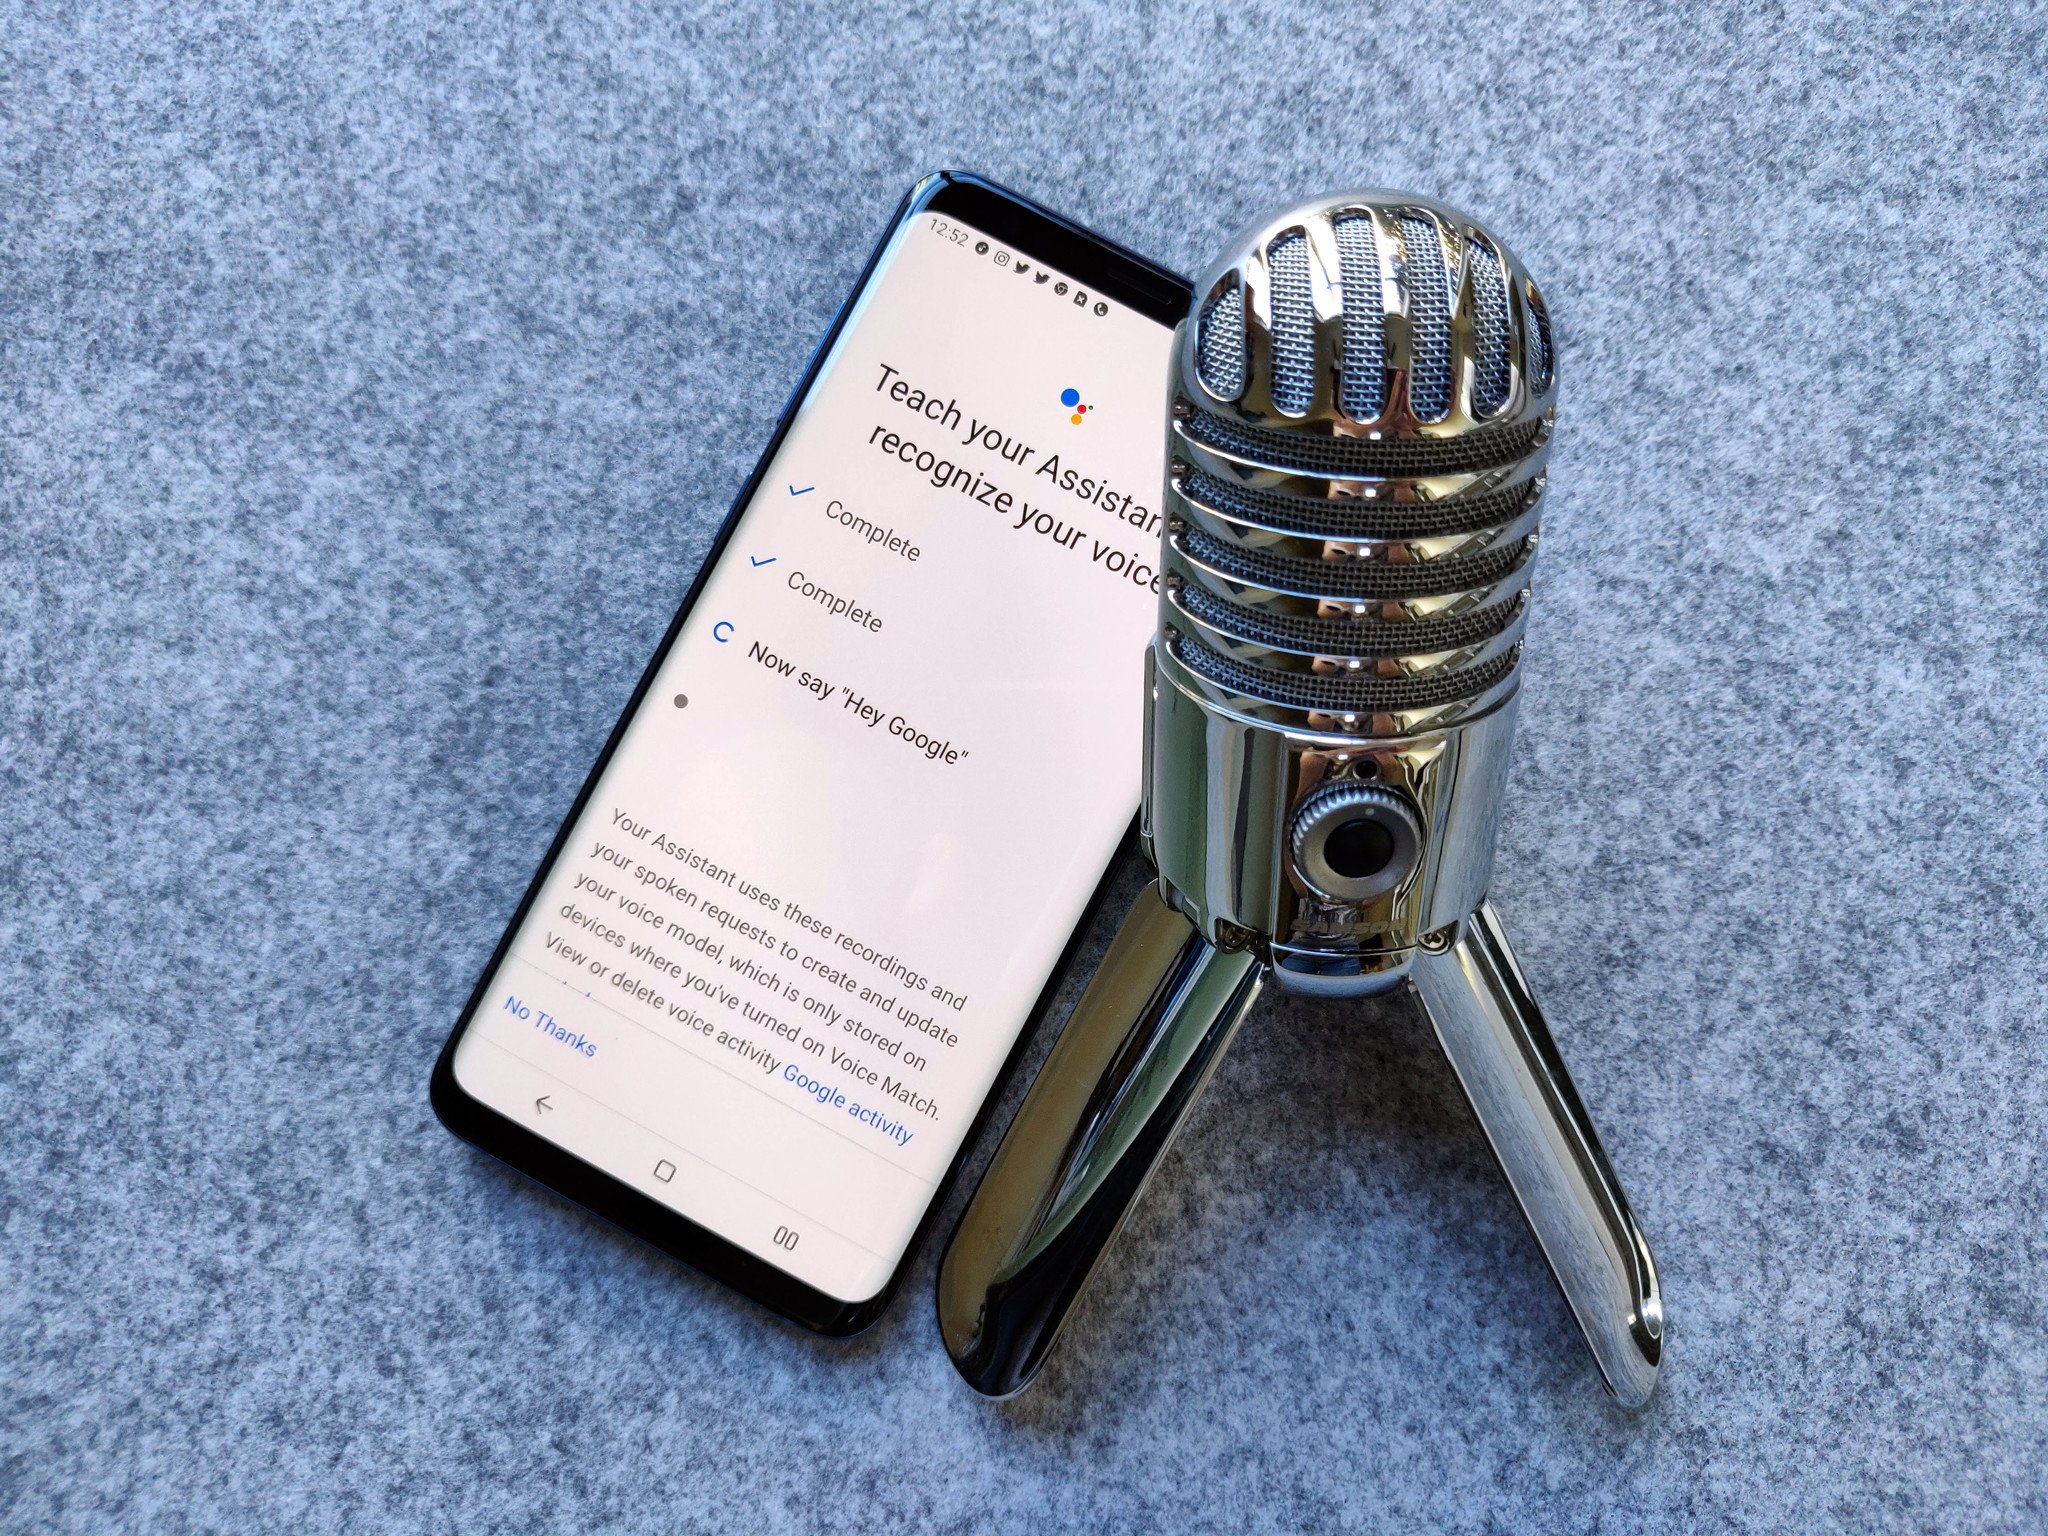 Voice Match training of Google Assistant